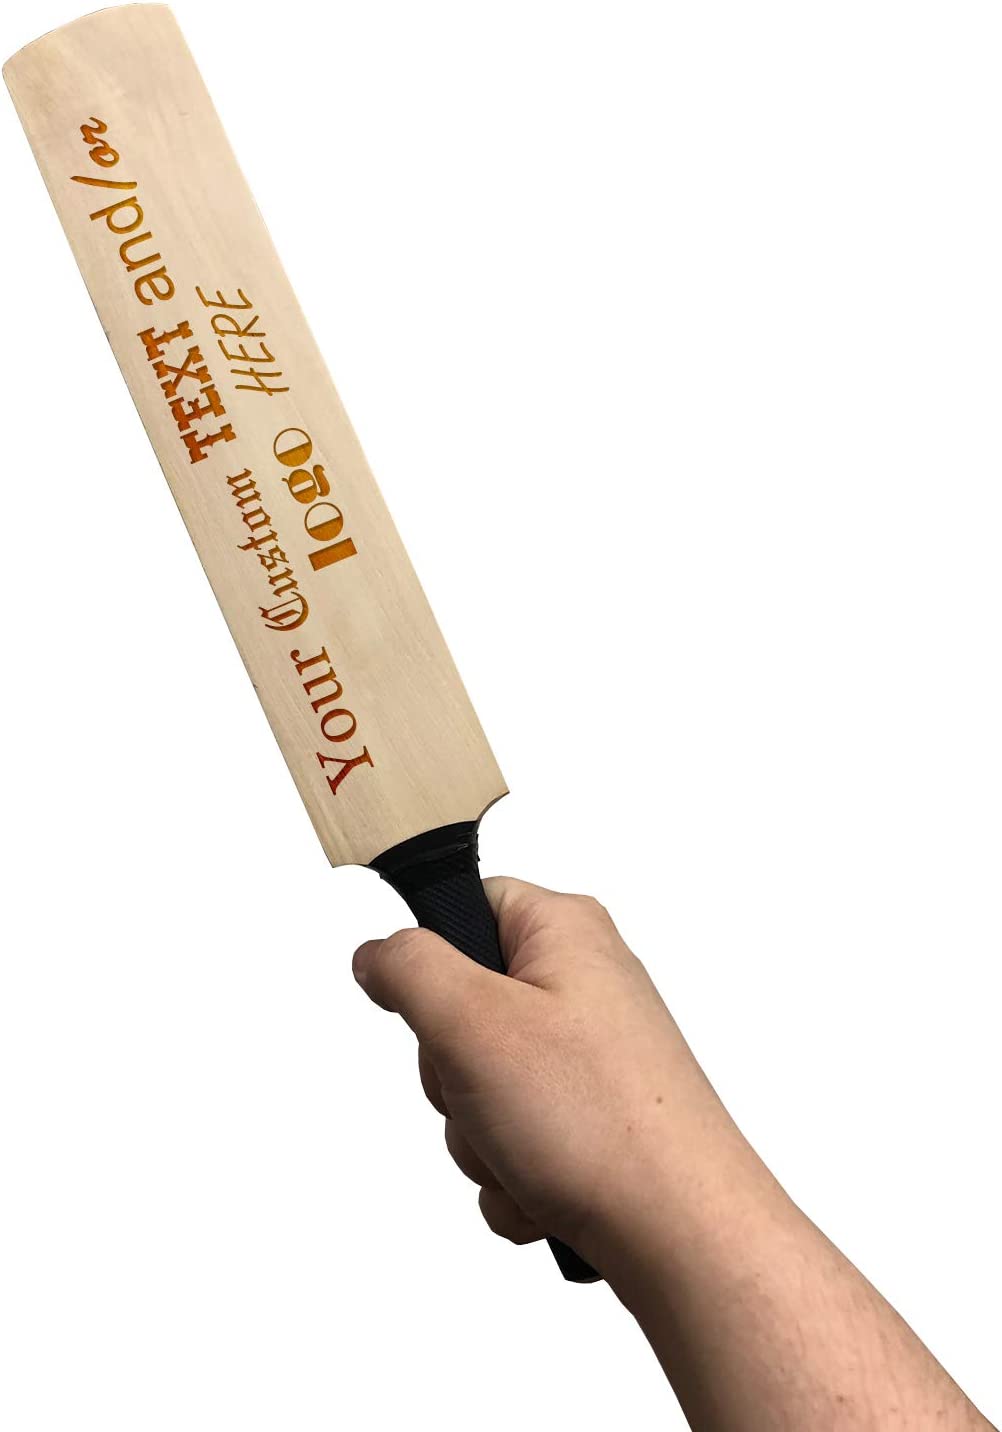 Customized Engraved Mini Toy 15.25 Inch Cricket Bat - Add Your Text or Logo